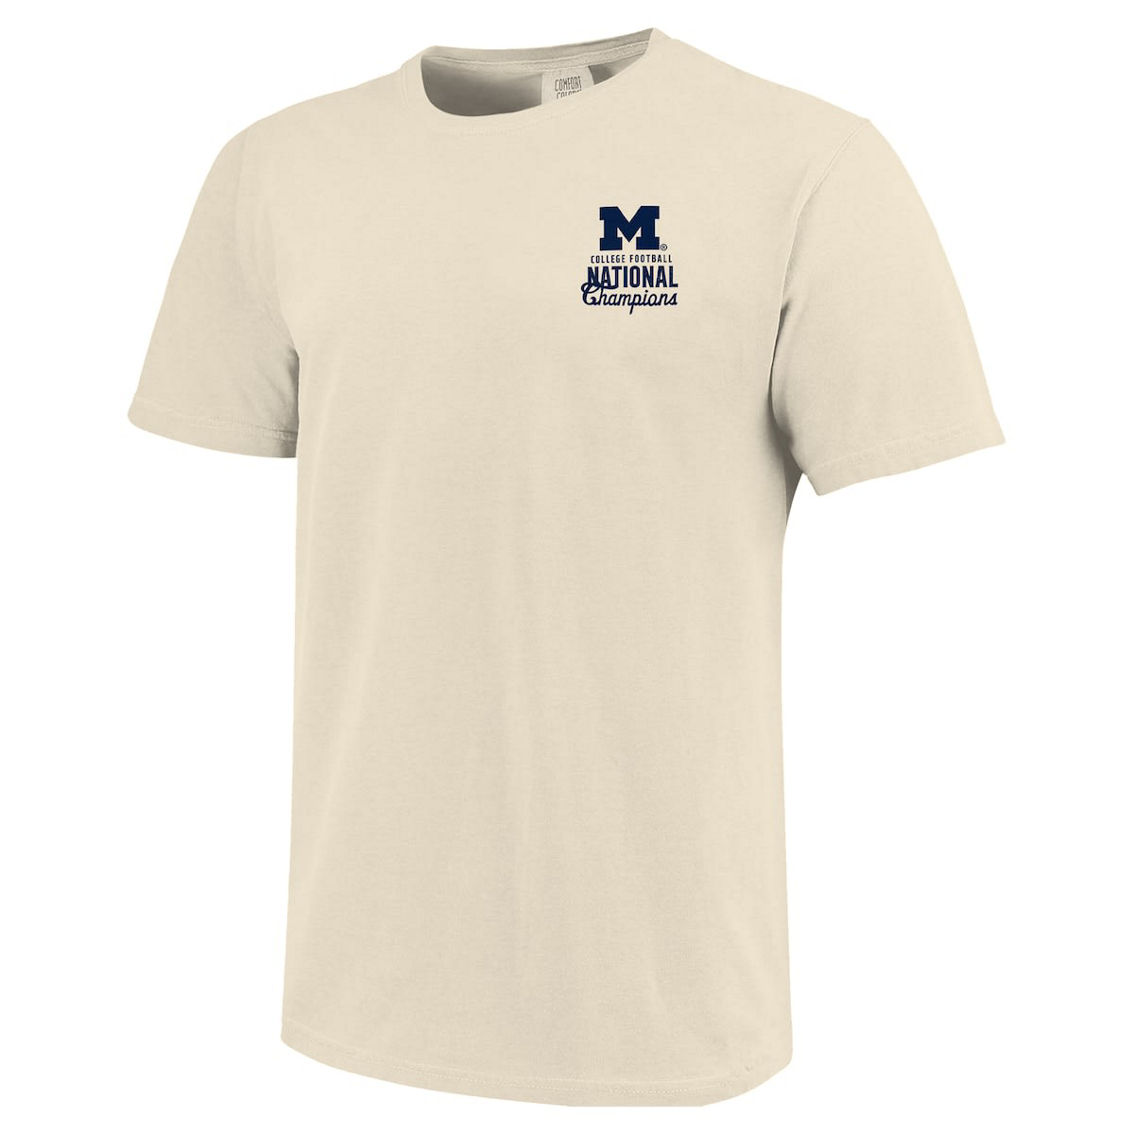 Men's Natural Michigan College Football Playoff National Champions T-Shirt - Image 3 of 4